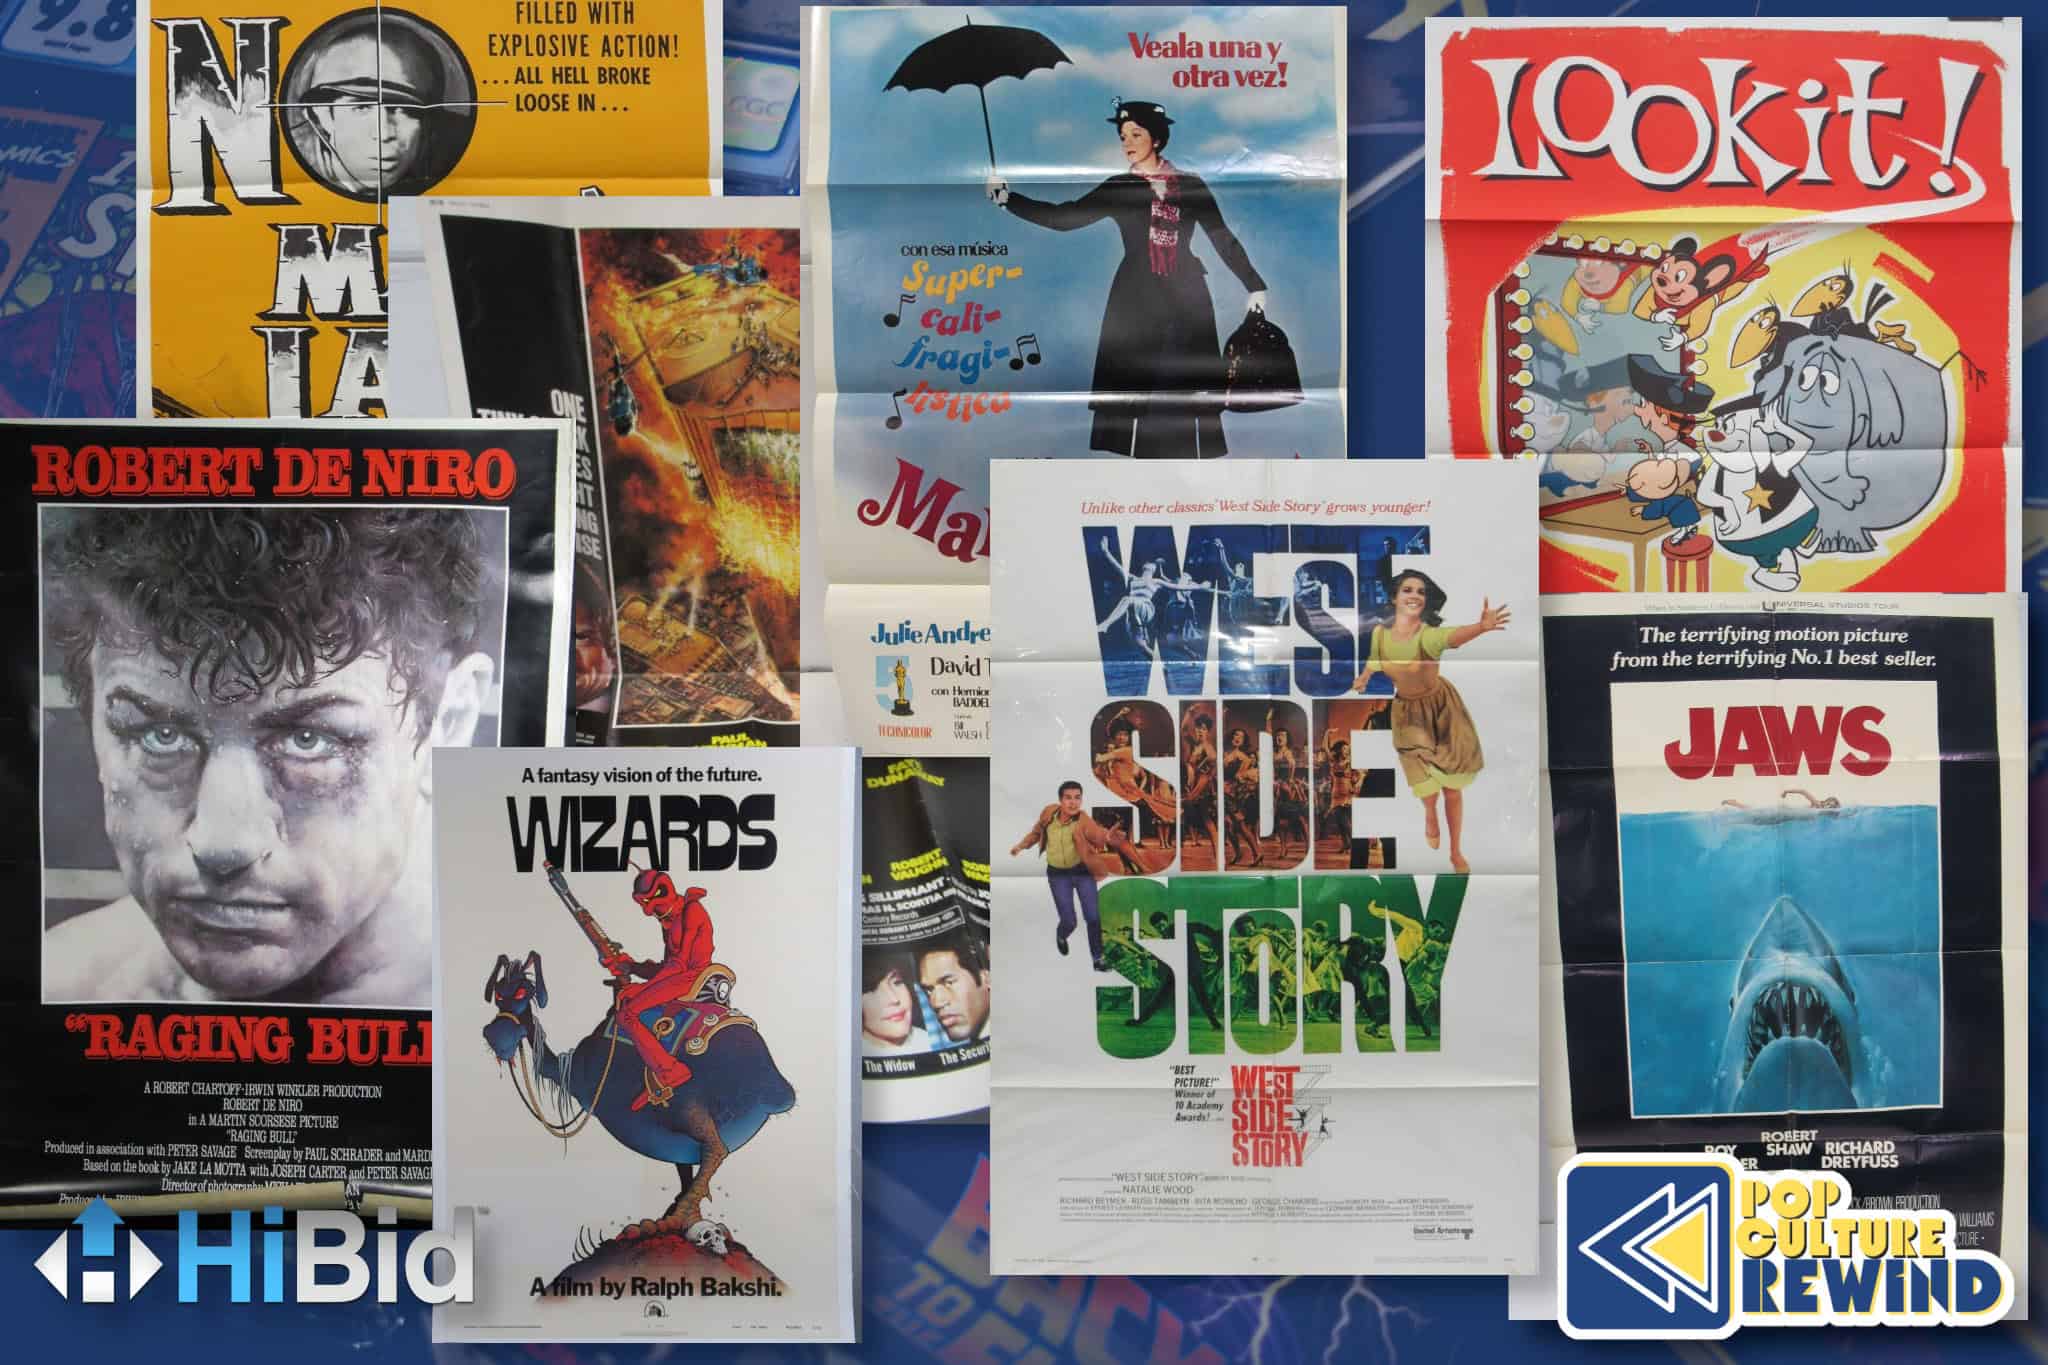 Movie Posters at auction on May 17